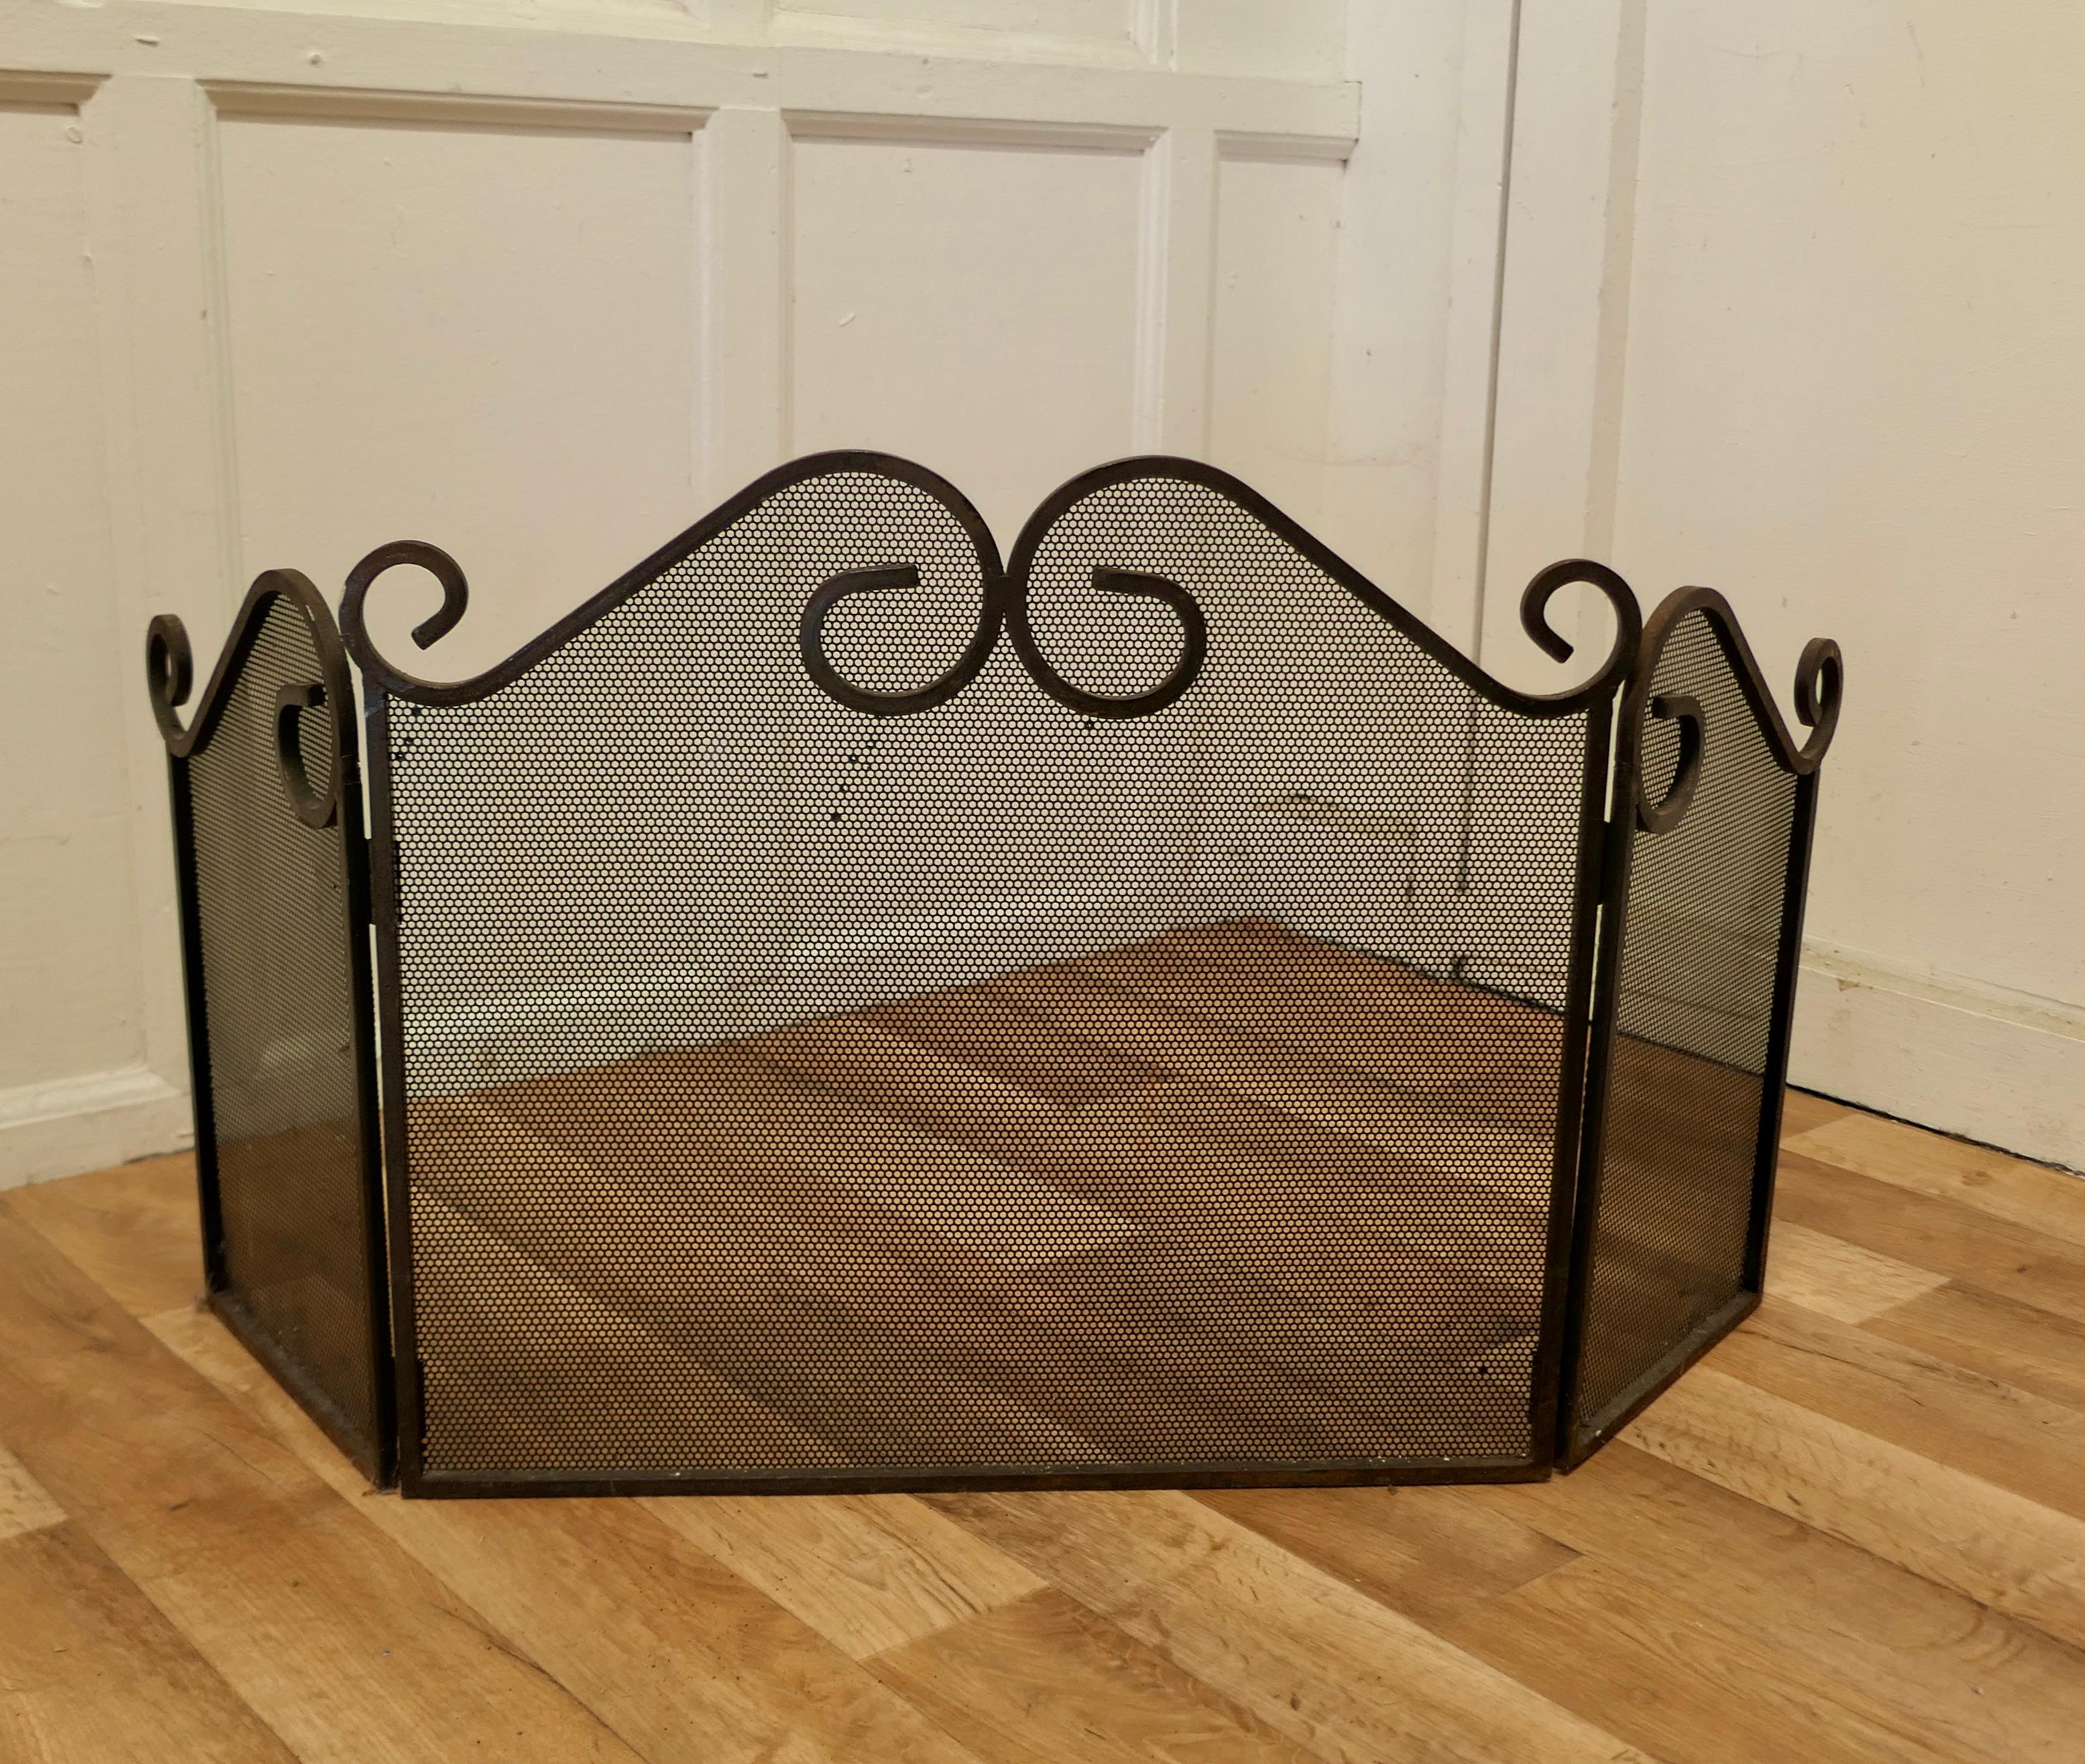 Folding wrought iron fire guard for inglenook fireplace.

This is a long Fireguard, it would suit a traditional Inglenook fireplace or any large fire.
The guard has a decorative wrought iron decoration over heavy inset mesh.
The guard is in good